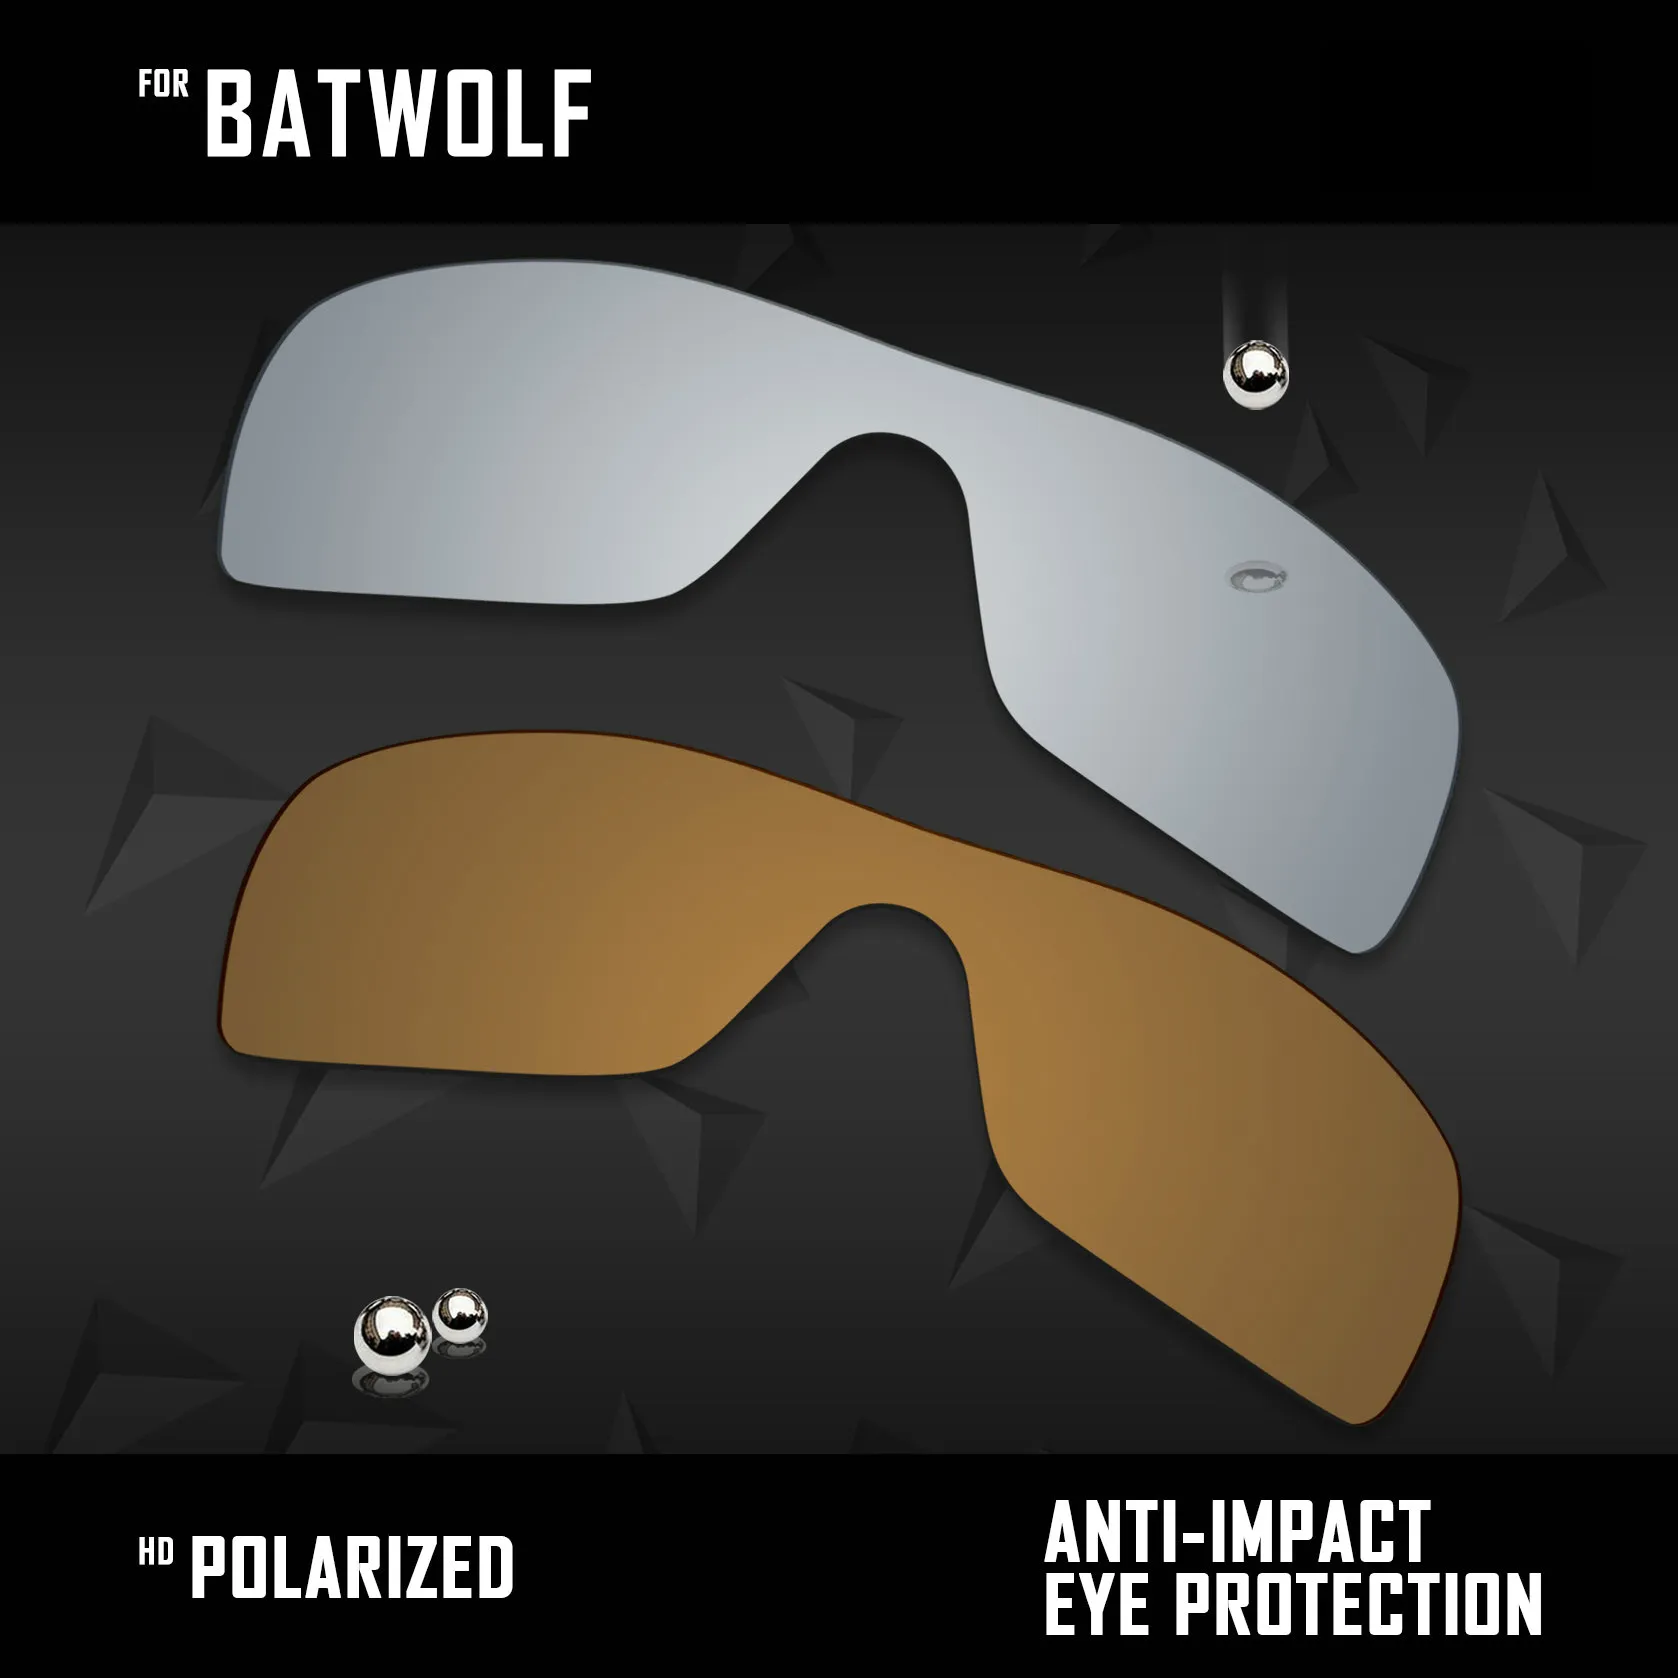 OOWLIT 2 Pieces Polarized Sunglasses Replacement Lenses for Oakley Batwolf-Silver and Bronze Gold